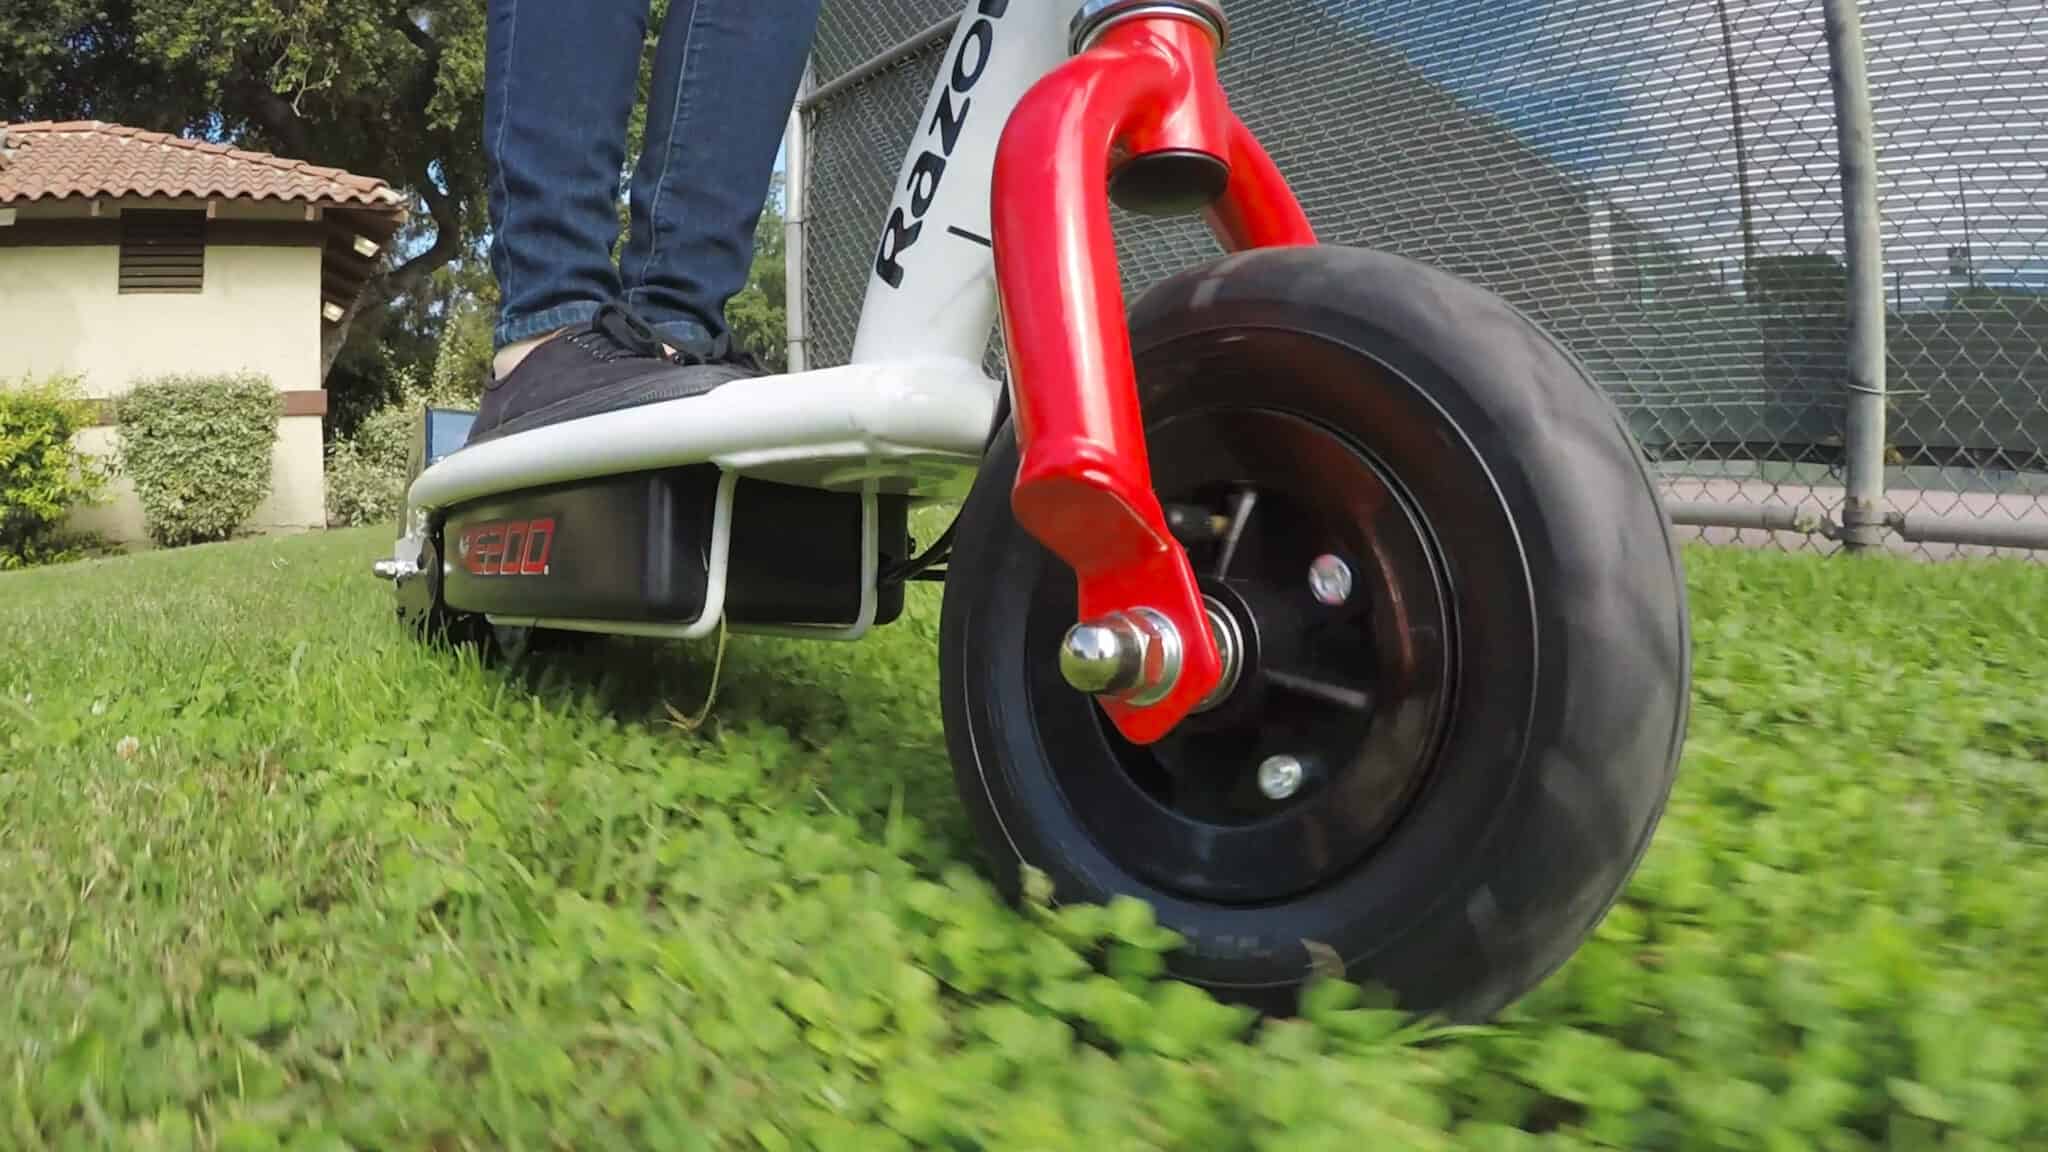 Razor E200 Electric Scooter Review - Worth the Money?